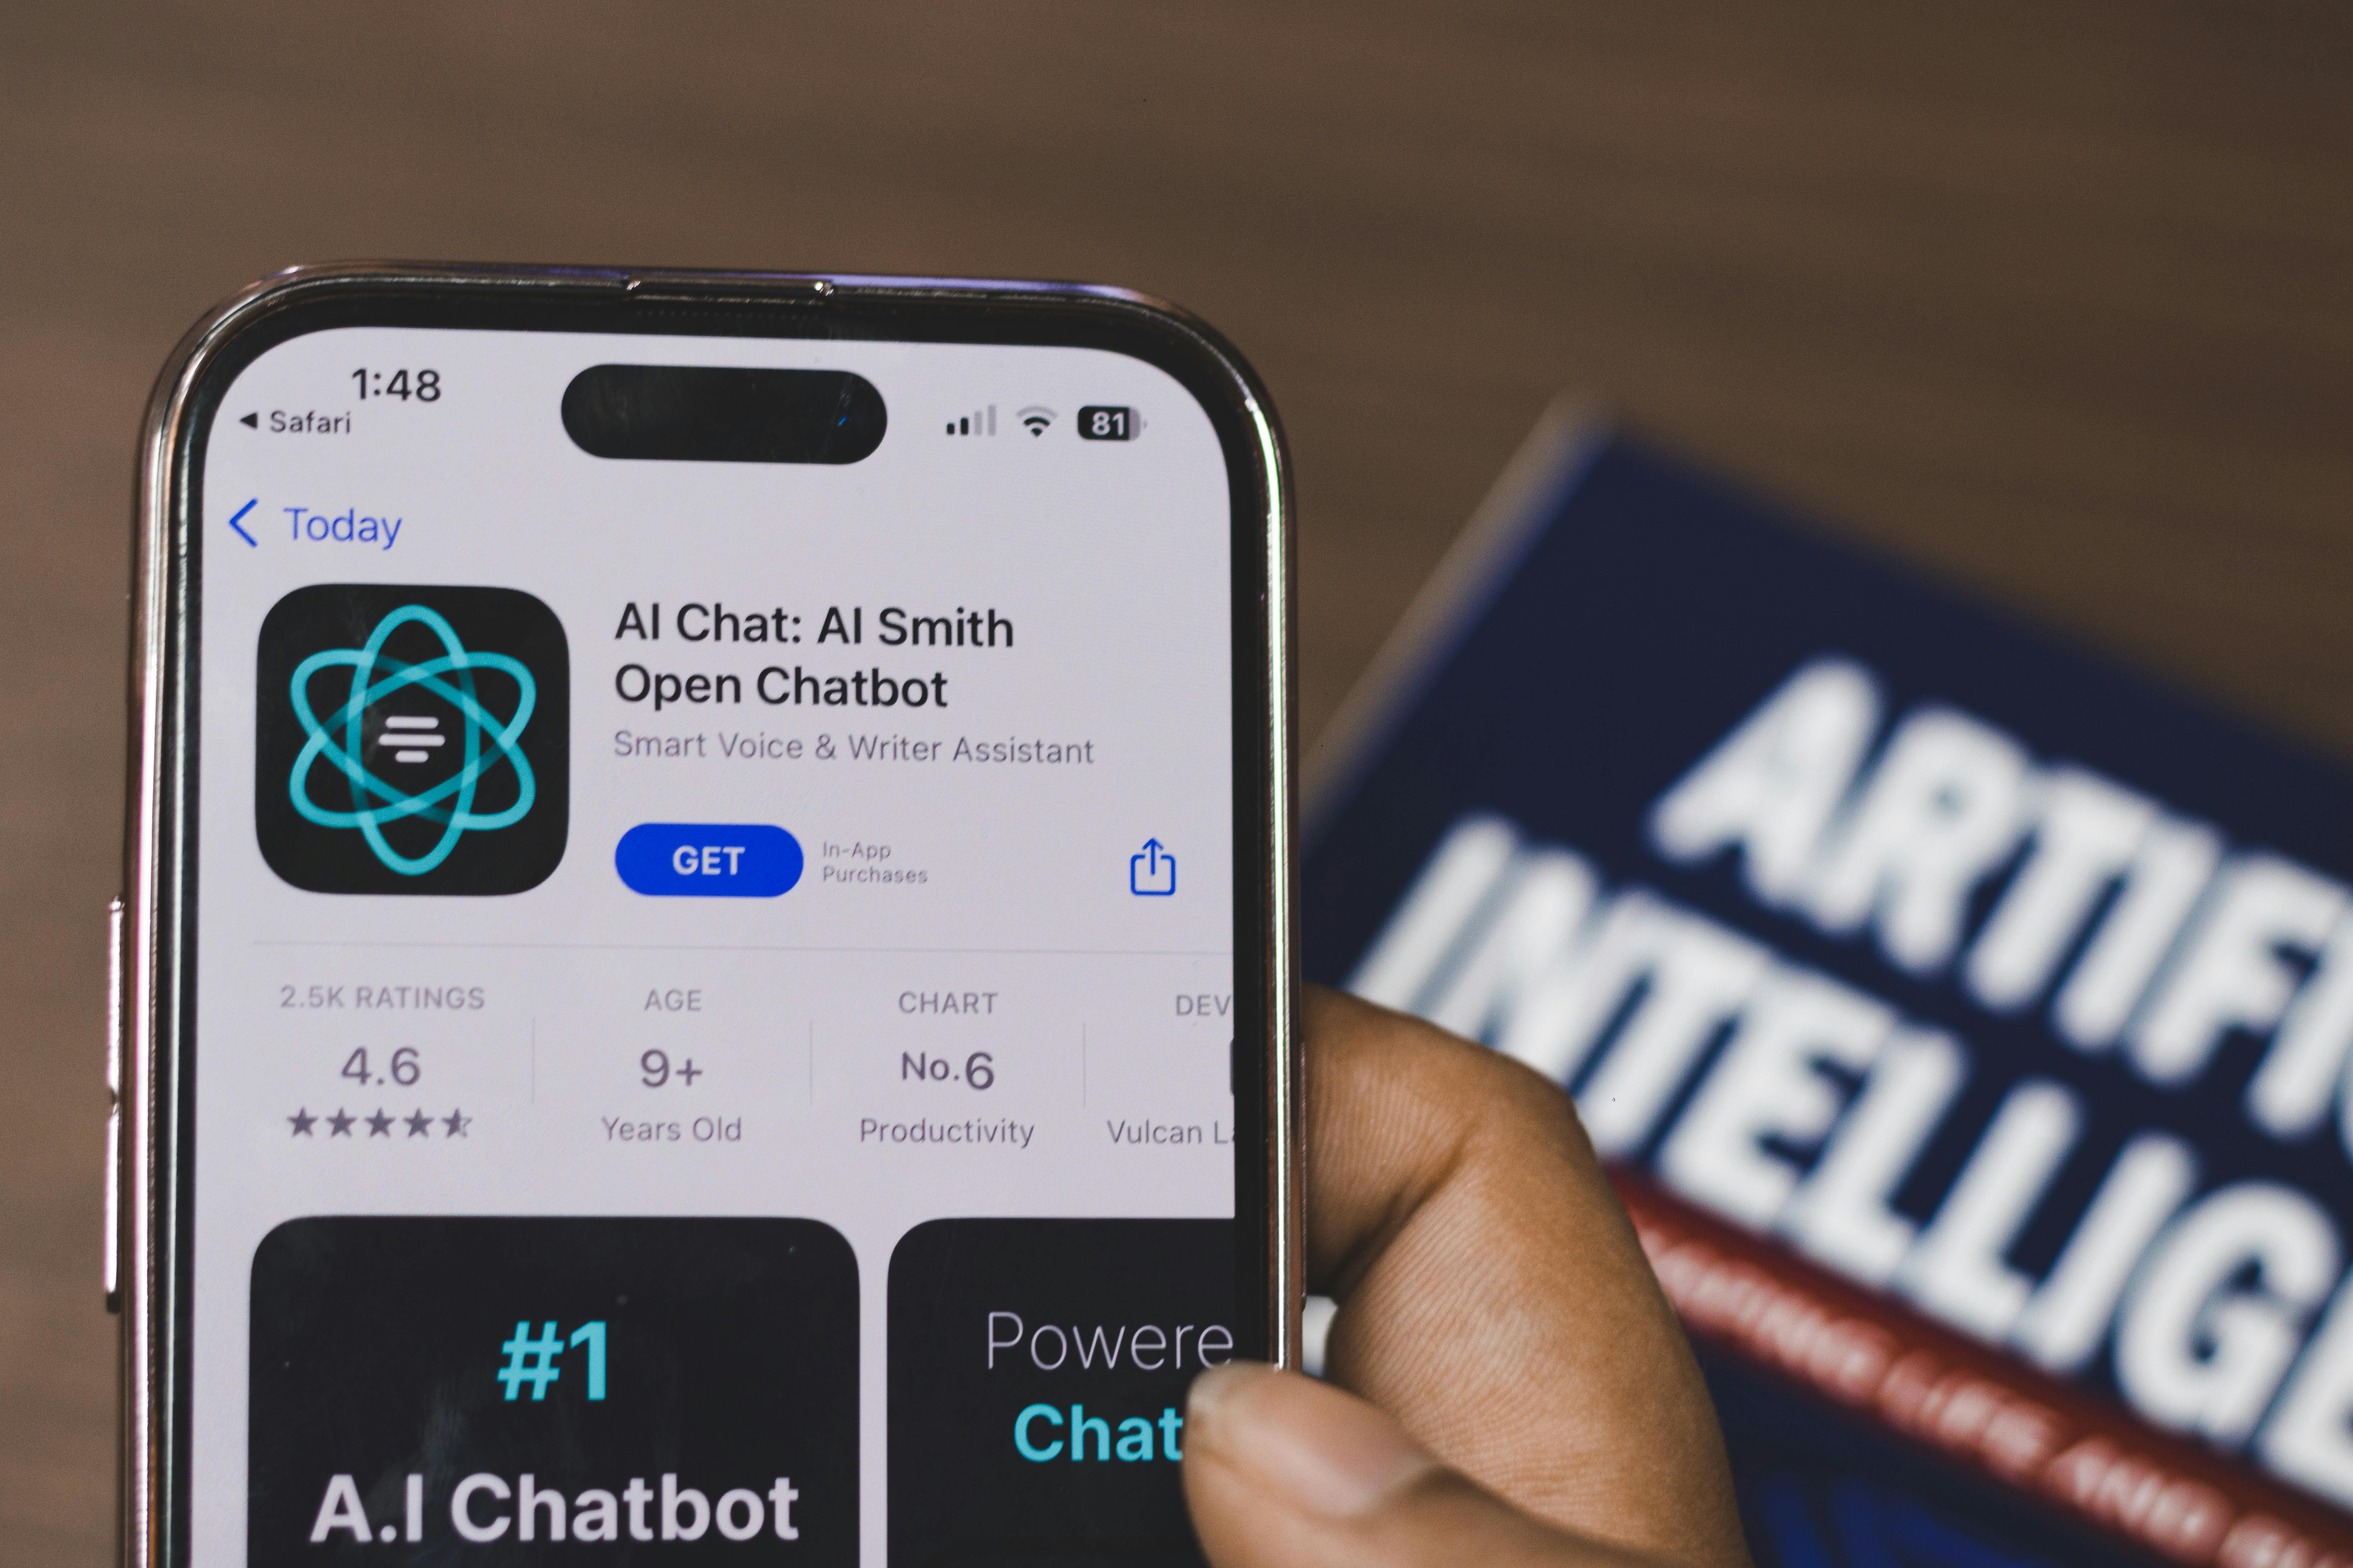 free-photo-of-webpage-of-ai-chatbot-a-prototype-ai-smith-open-chatbot-is-seen-on-the-website-of-openai-on-a-apple-smartphone-examples-capabilities-and-limitations-are-shown